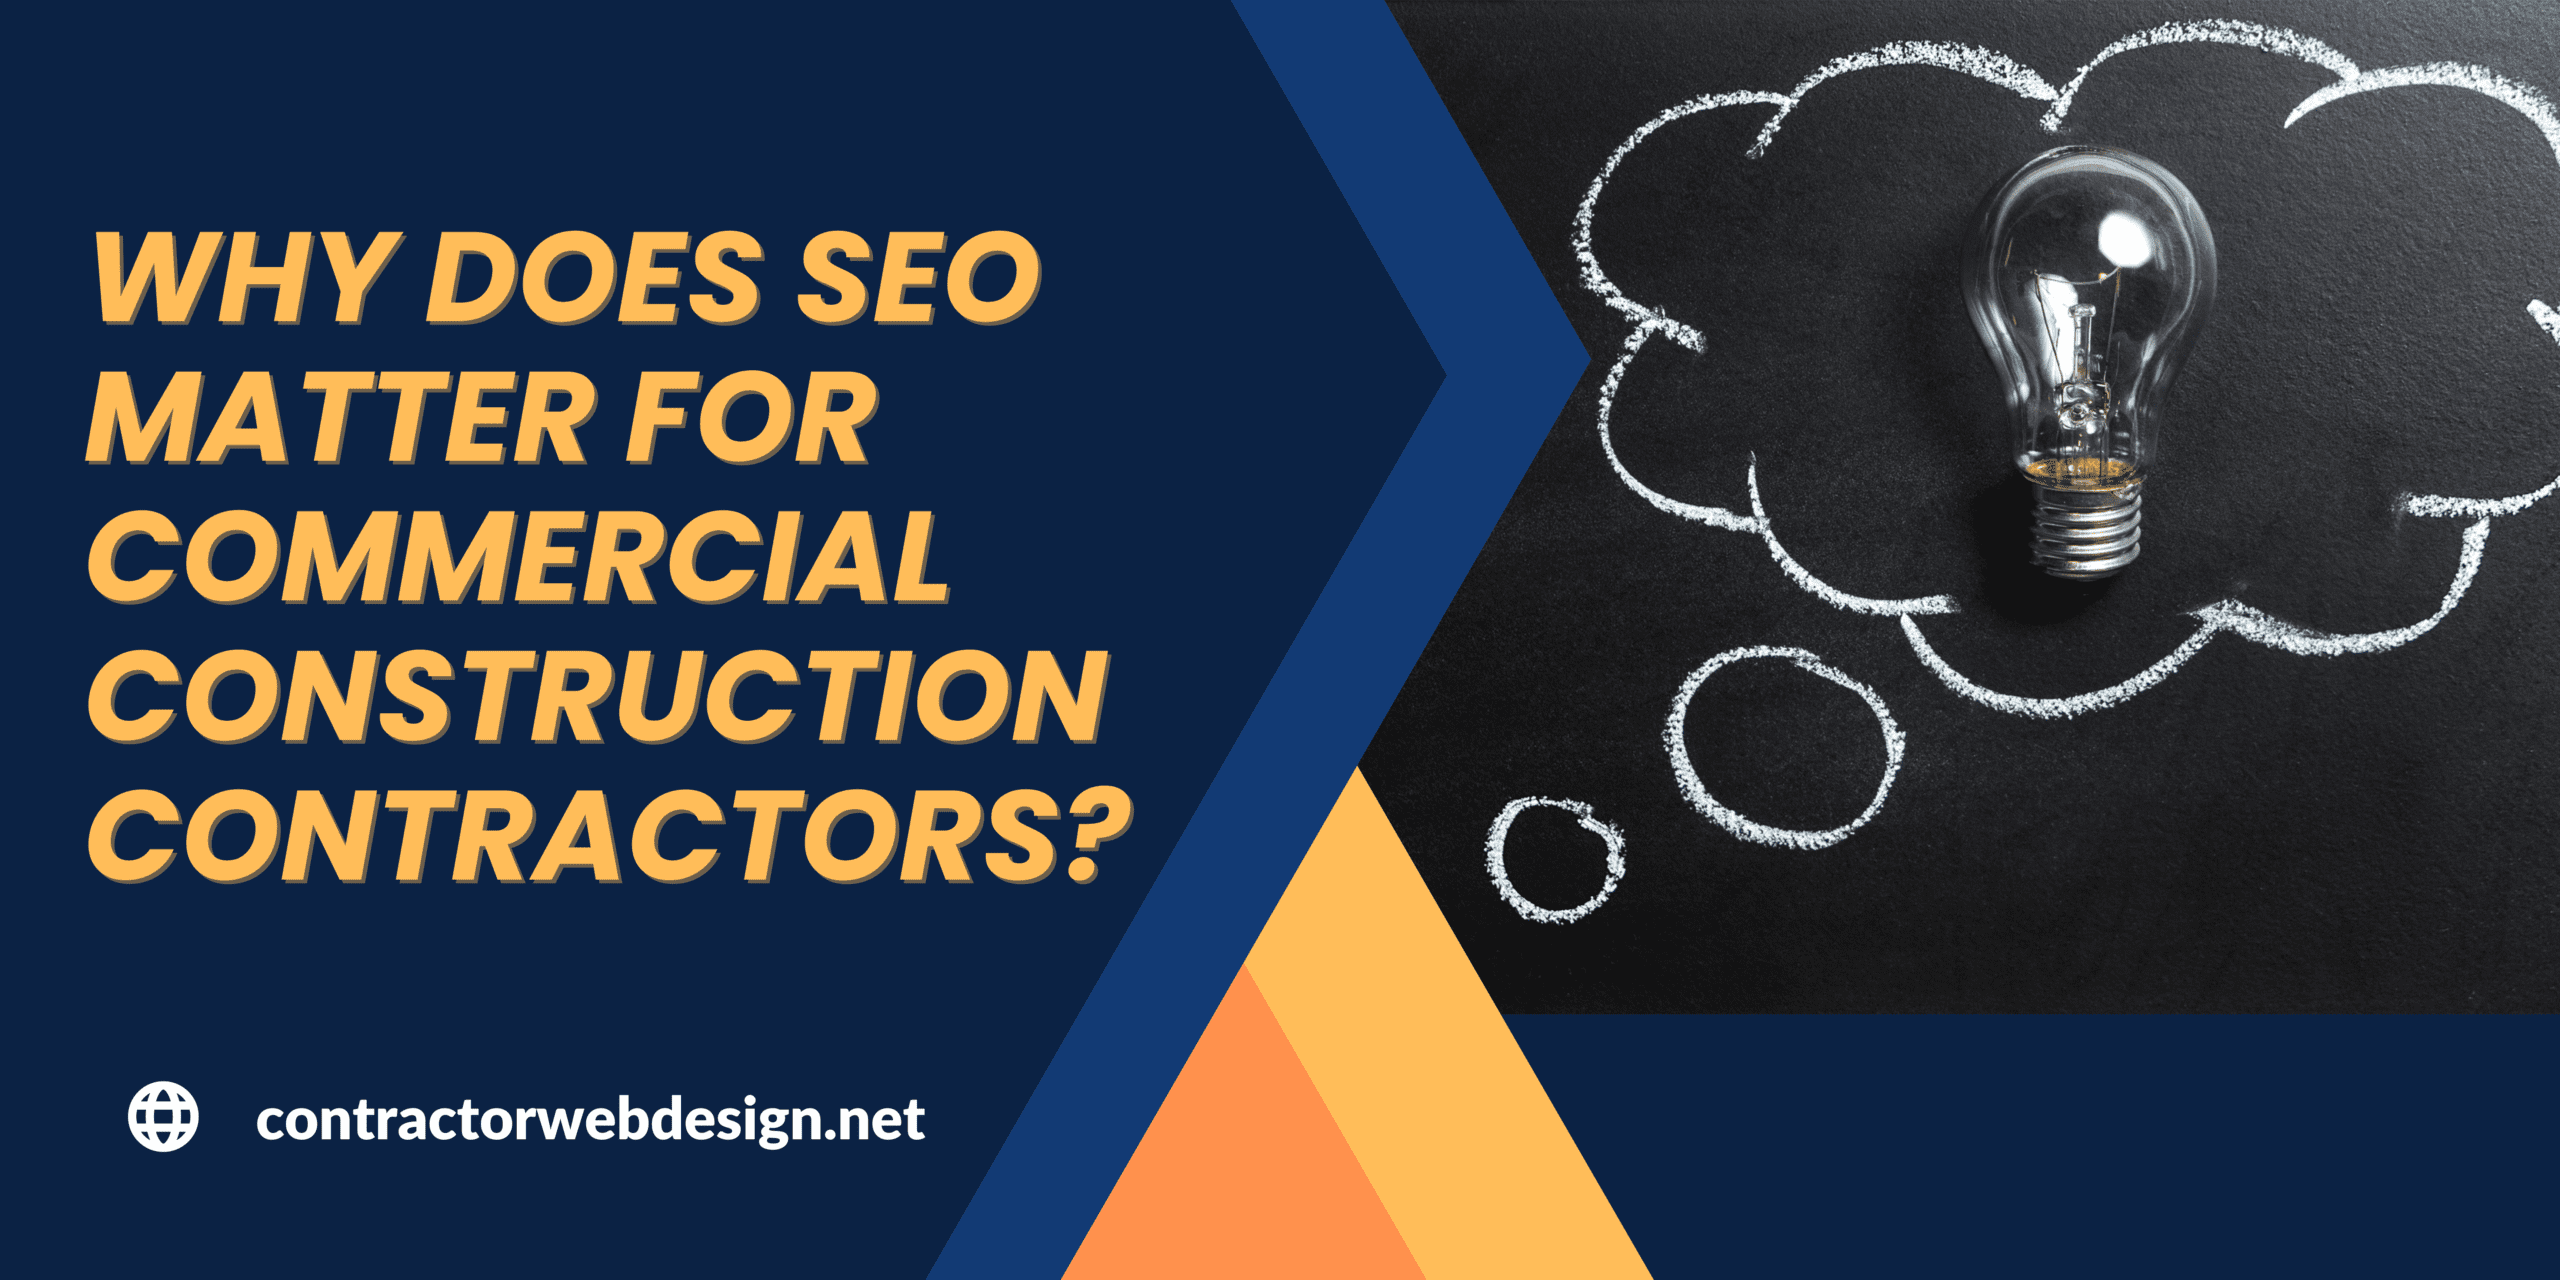 Why does seo matter for commercial construction companies